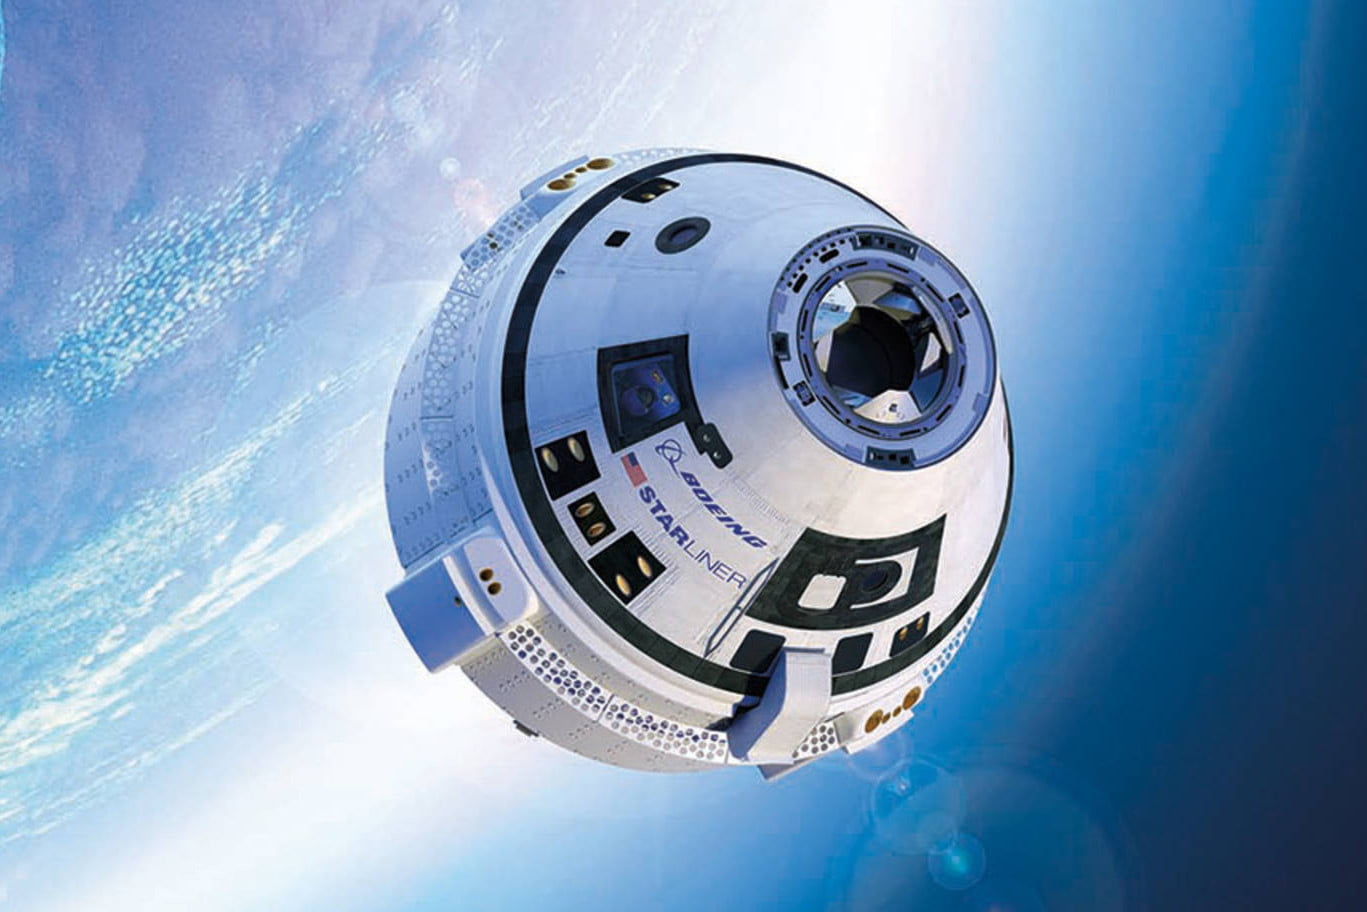 Boeing names date for second Starliner capsule test flight